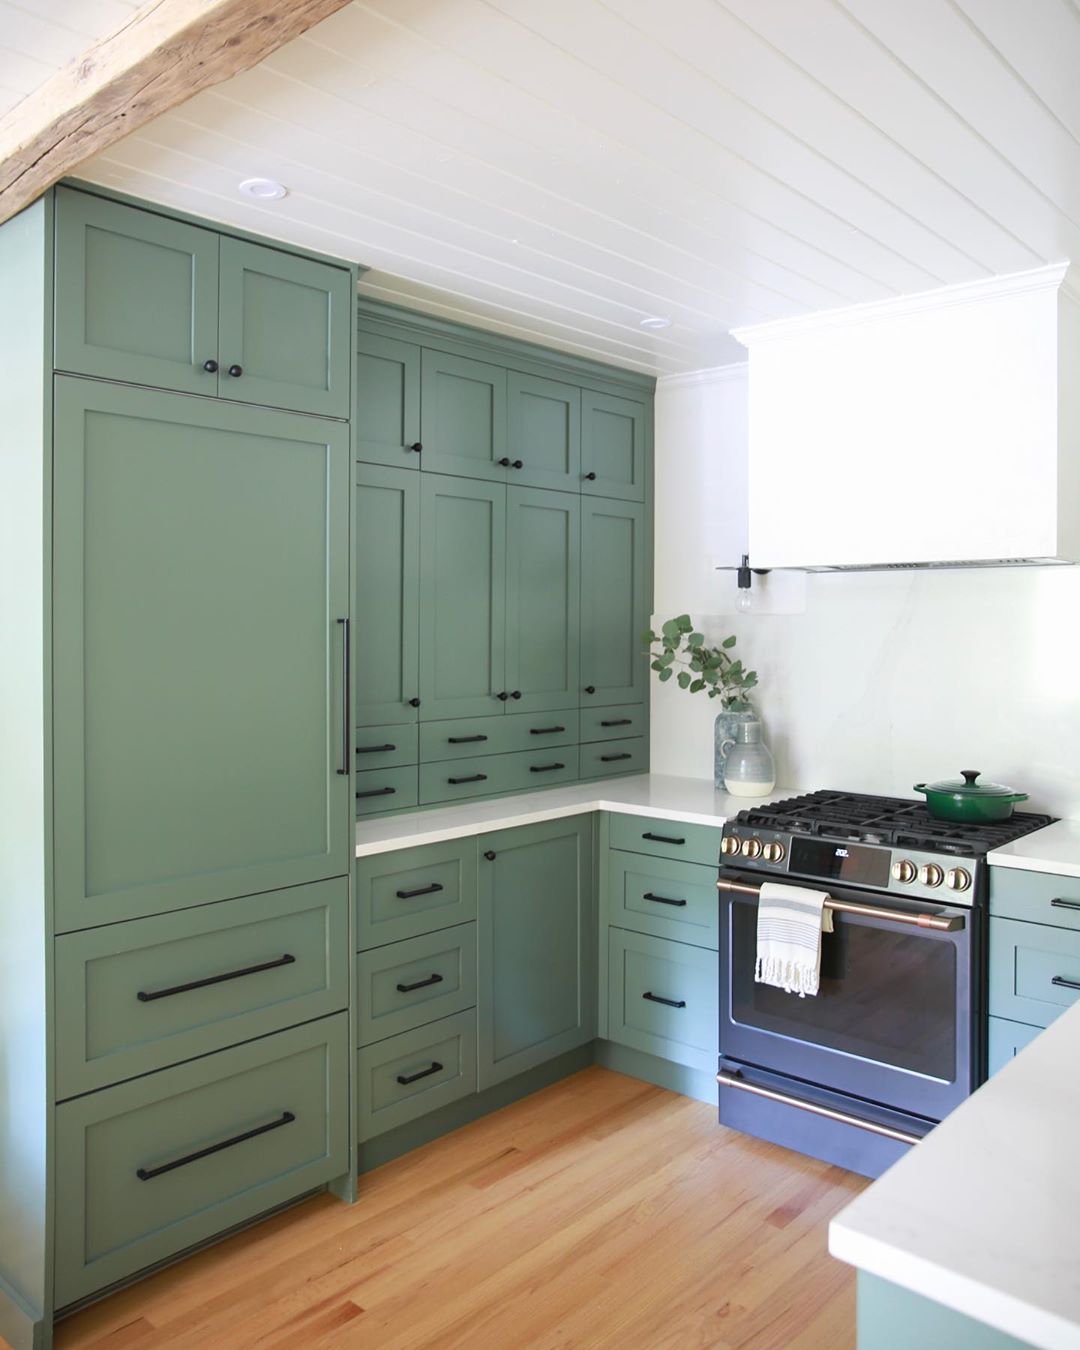 Green kitchen cabinets from Oak Design Project on Instagram